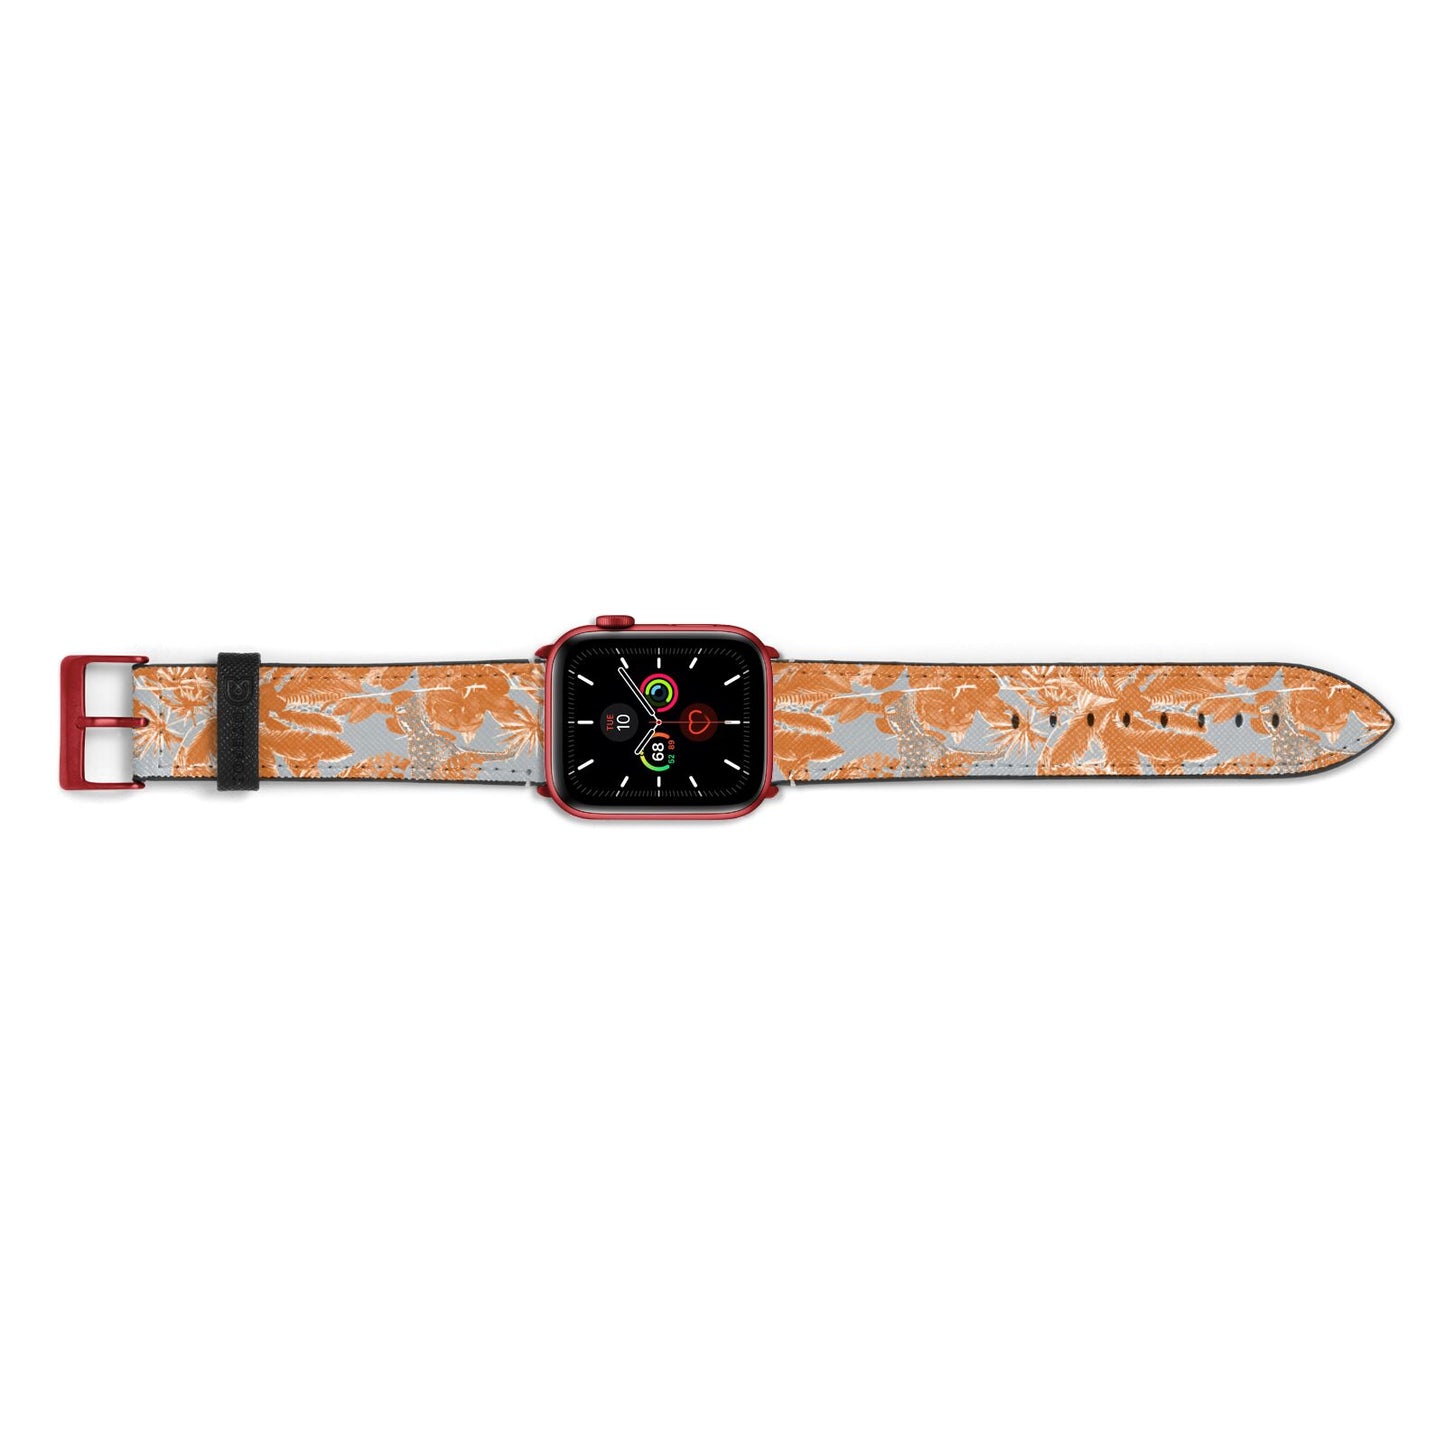 Tropical Apple Watch Strap Landscape Image Red Hardware